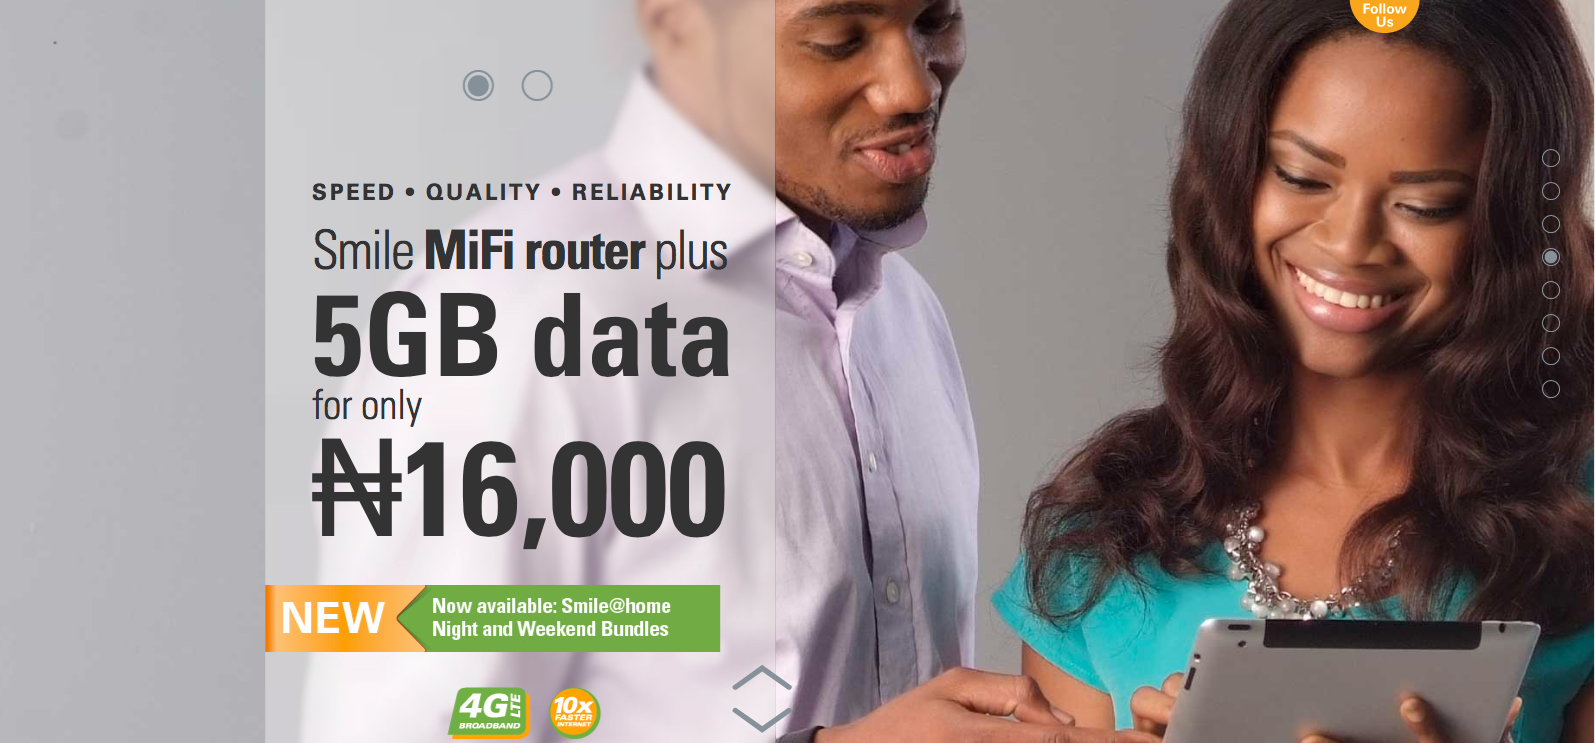 Screenshot of new-entrant ISP, Smile, promoting its 4G LTE service